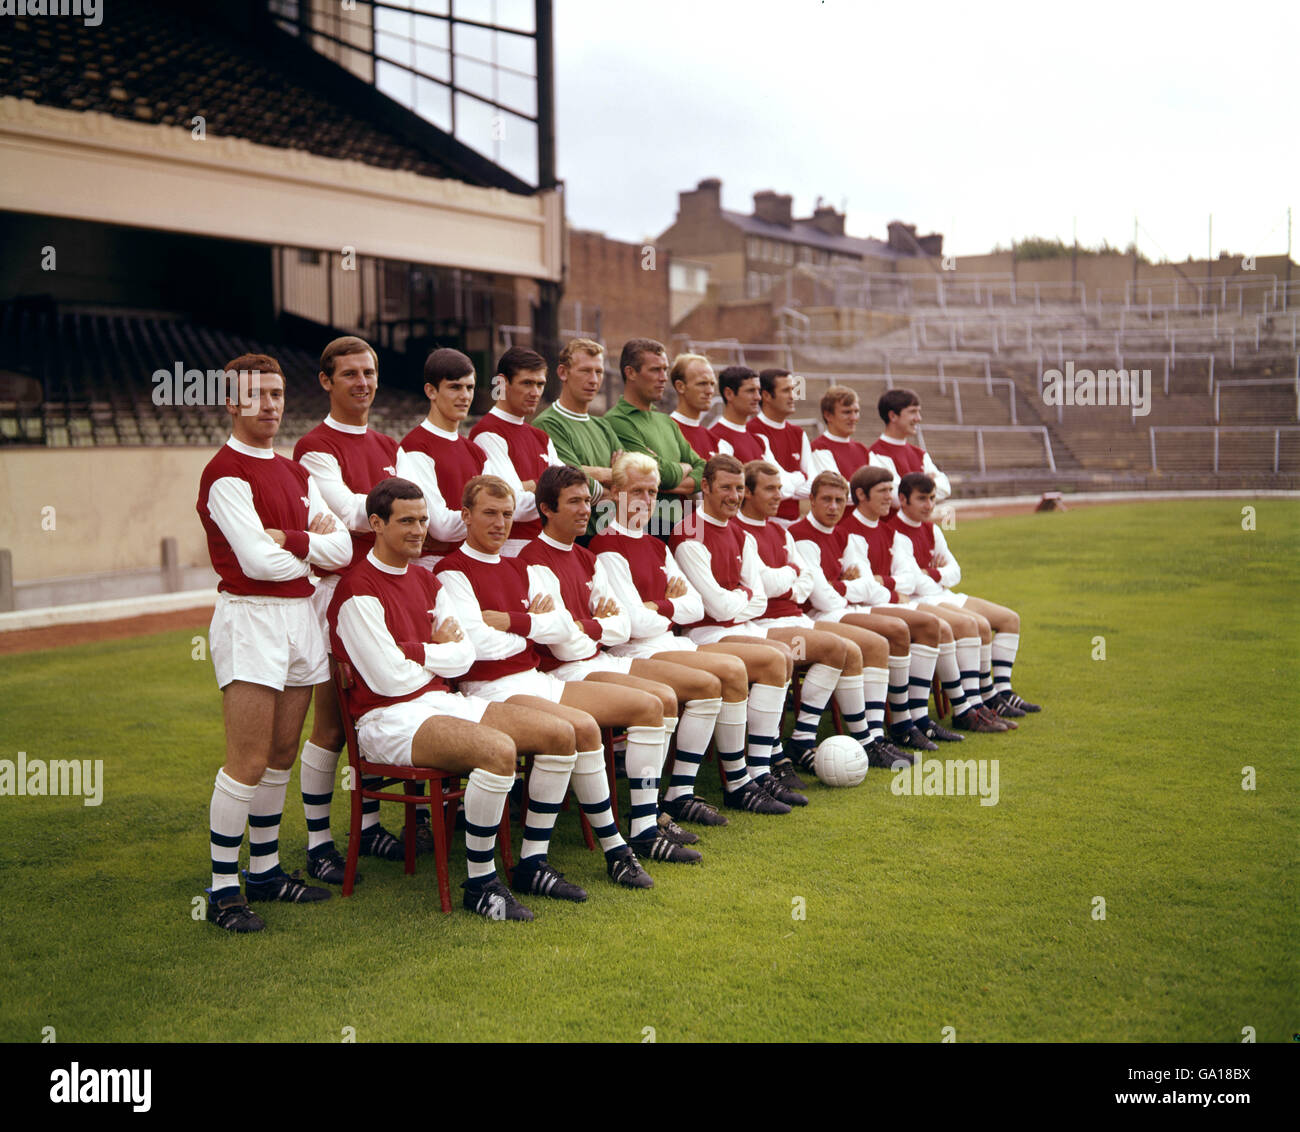 Football - football League Division One - Arsenal Photocall. Arsenal F.C. premier groupe d'équipe juillet 1967 Banque D'Images